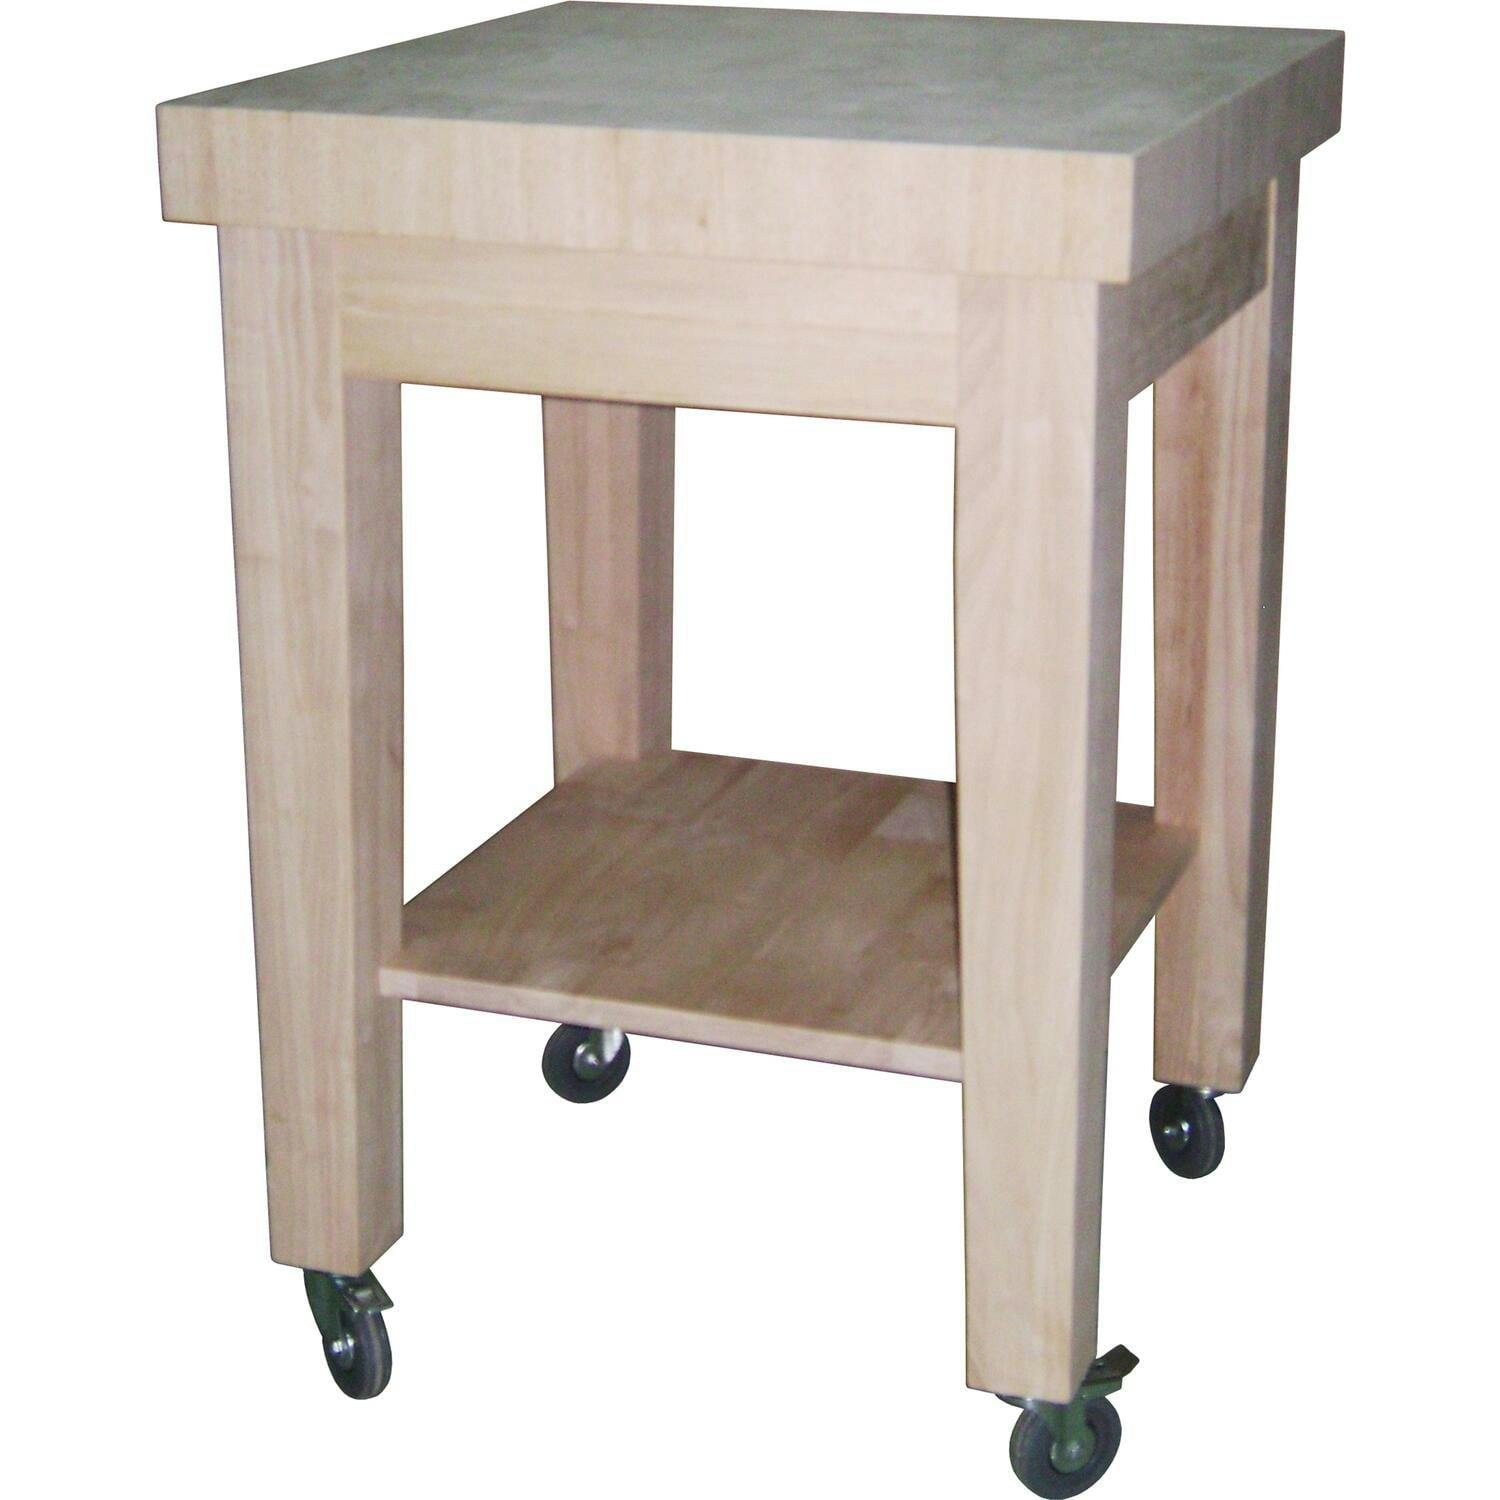 Solid Hardwood Unfinished Traditional Kitchen Island with Casters